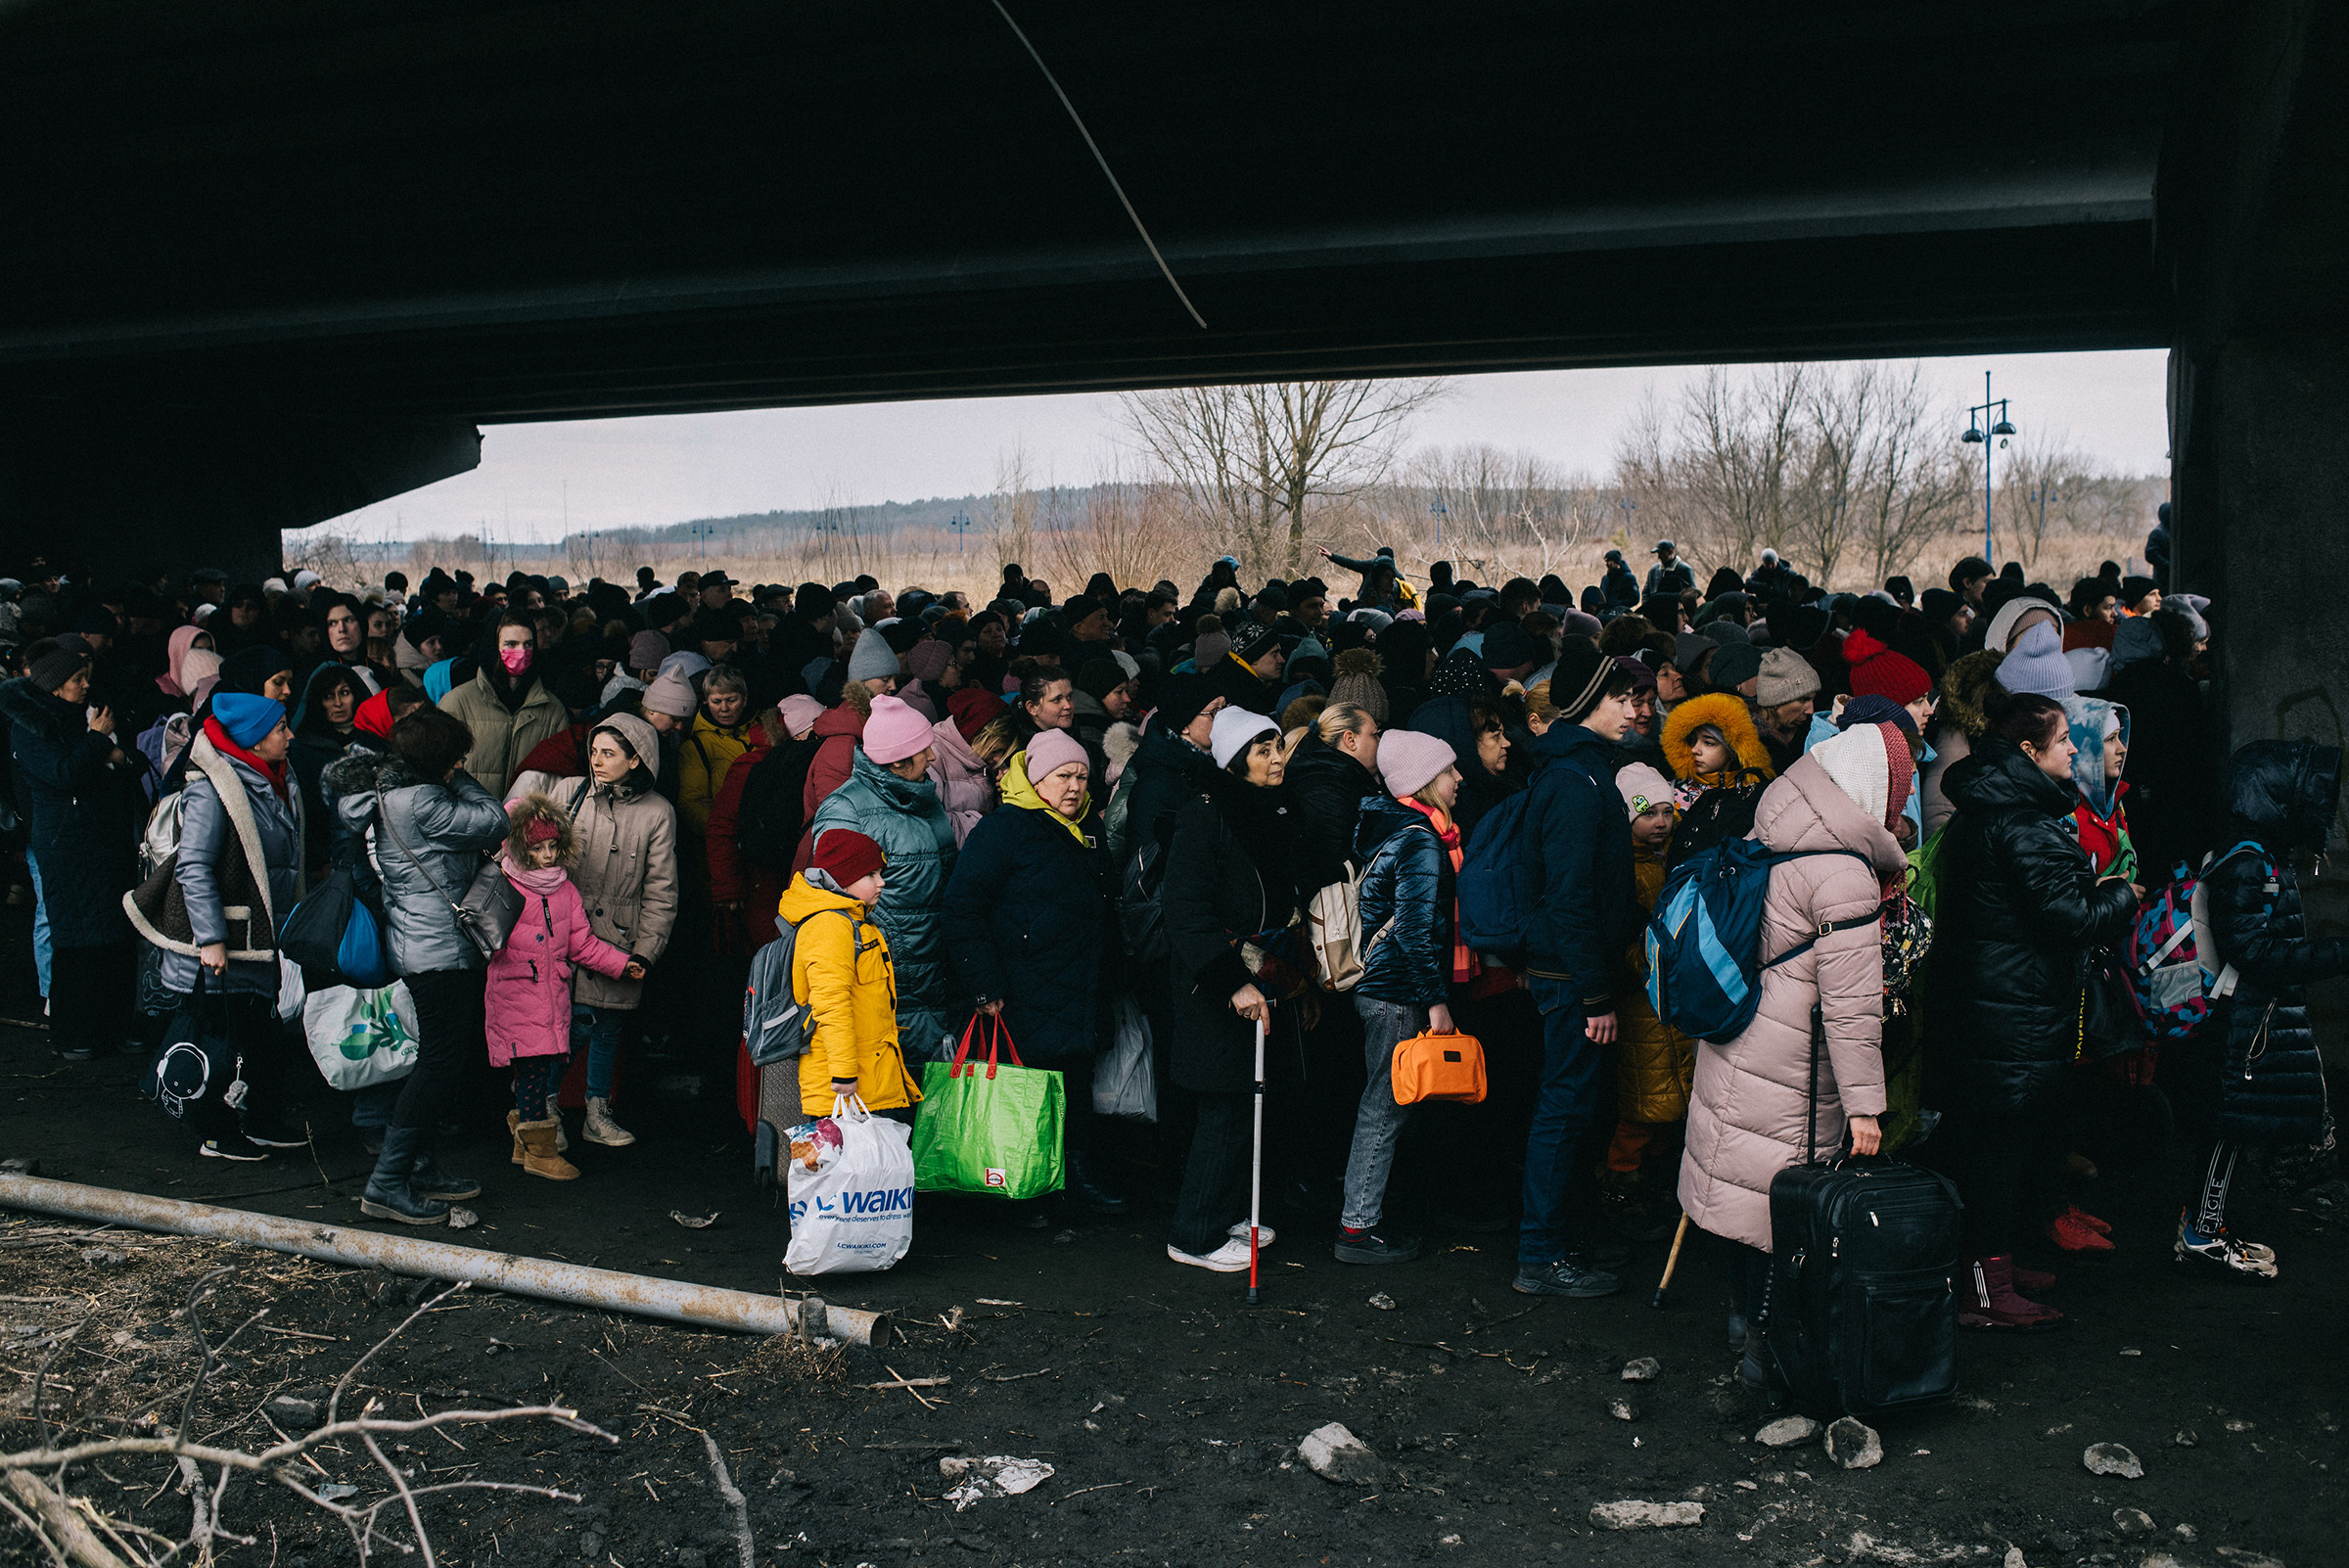 Evacuation of civilians from Irpin town, through a bridge destroyed by shelling. The bridge was destroyed by the Armed Forces of Ukraine to prevent the enemy from reaching Kyiv. On this day at 10 am women, children and the elderly were supposed to be evacuated from the town by trains, but the enemy blew up the railroad tracks, and so people were asked to move to another place, from where they should be picked up by buses for transportation to the Kyiv railway station. Irpin town, Kyiv region, Ukraine, 05.03.2022